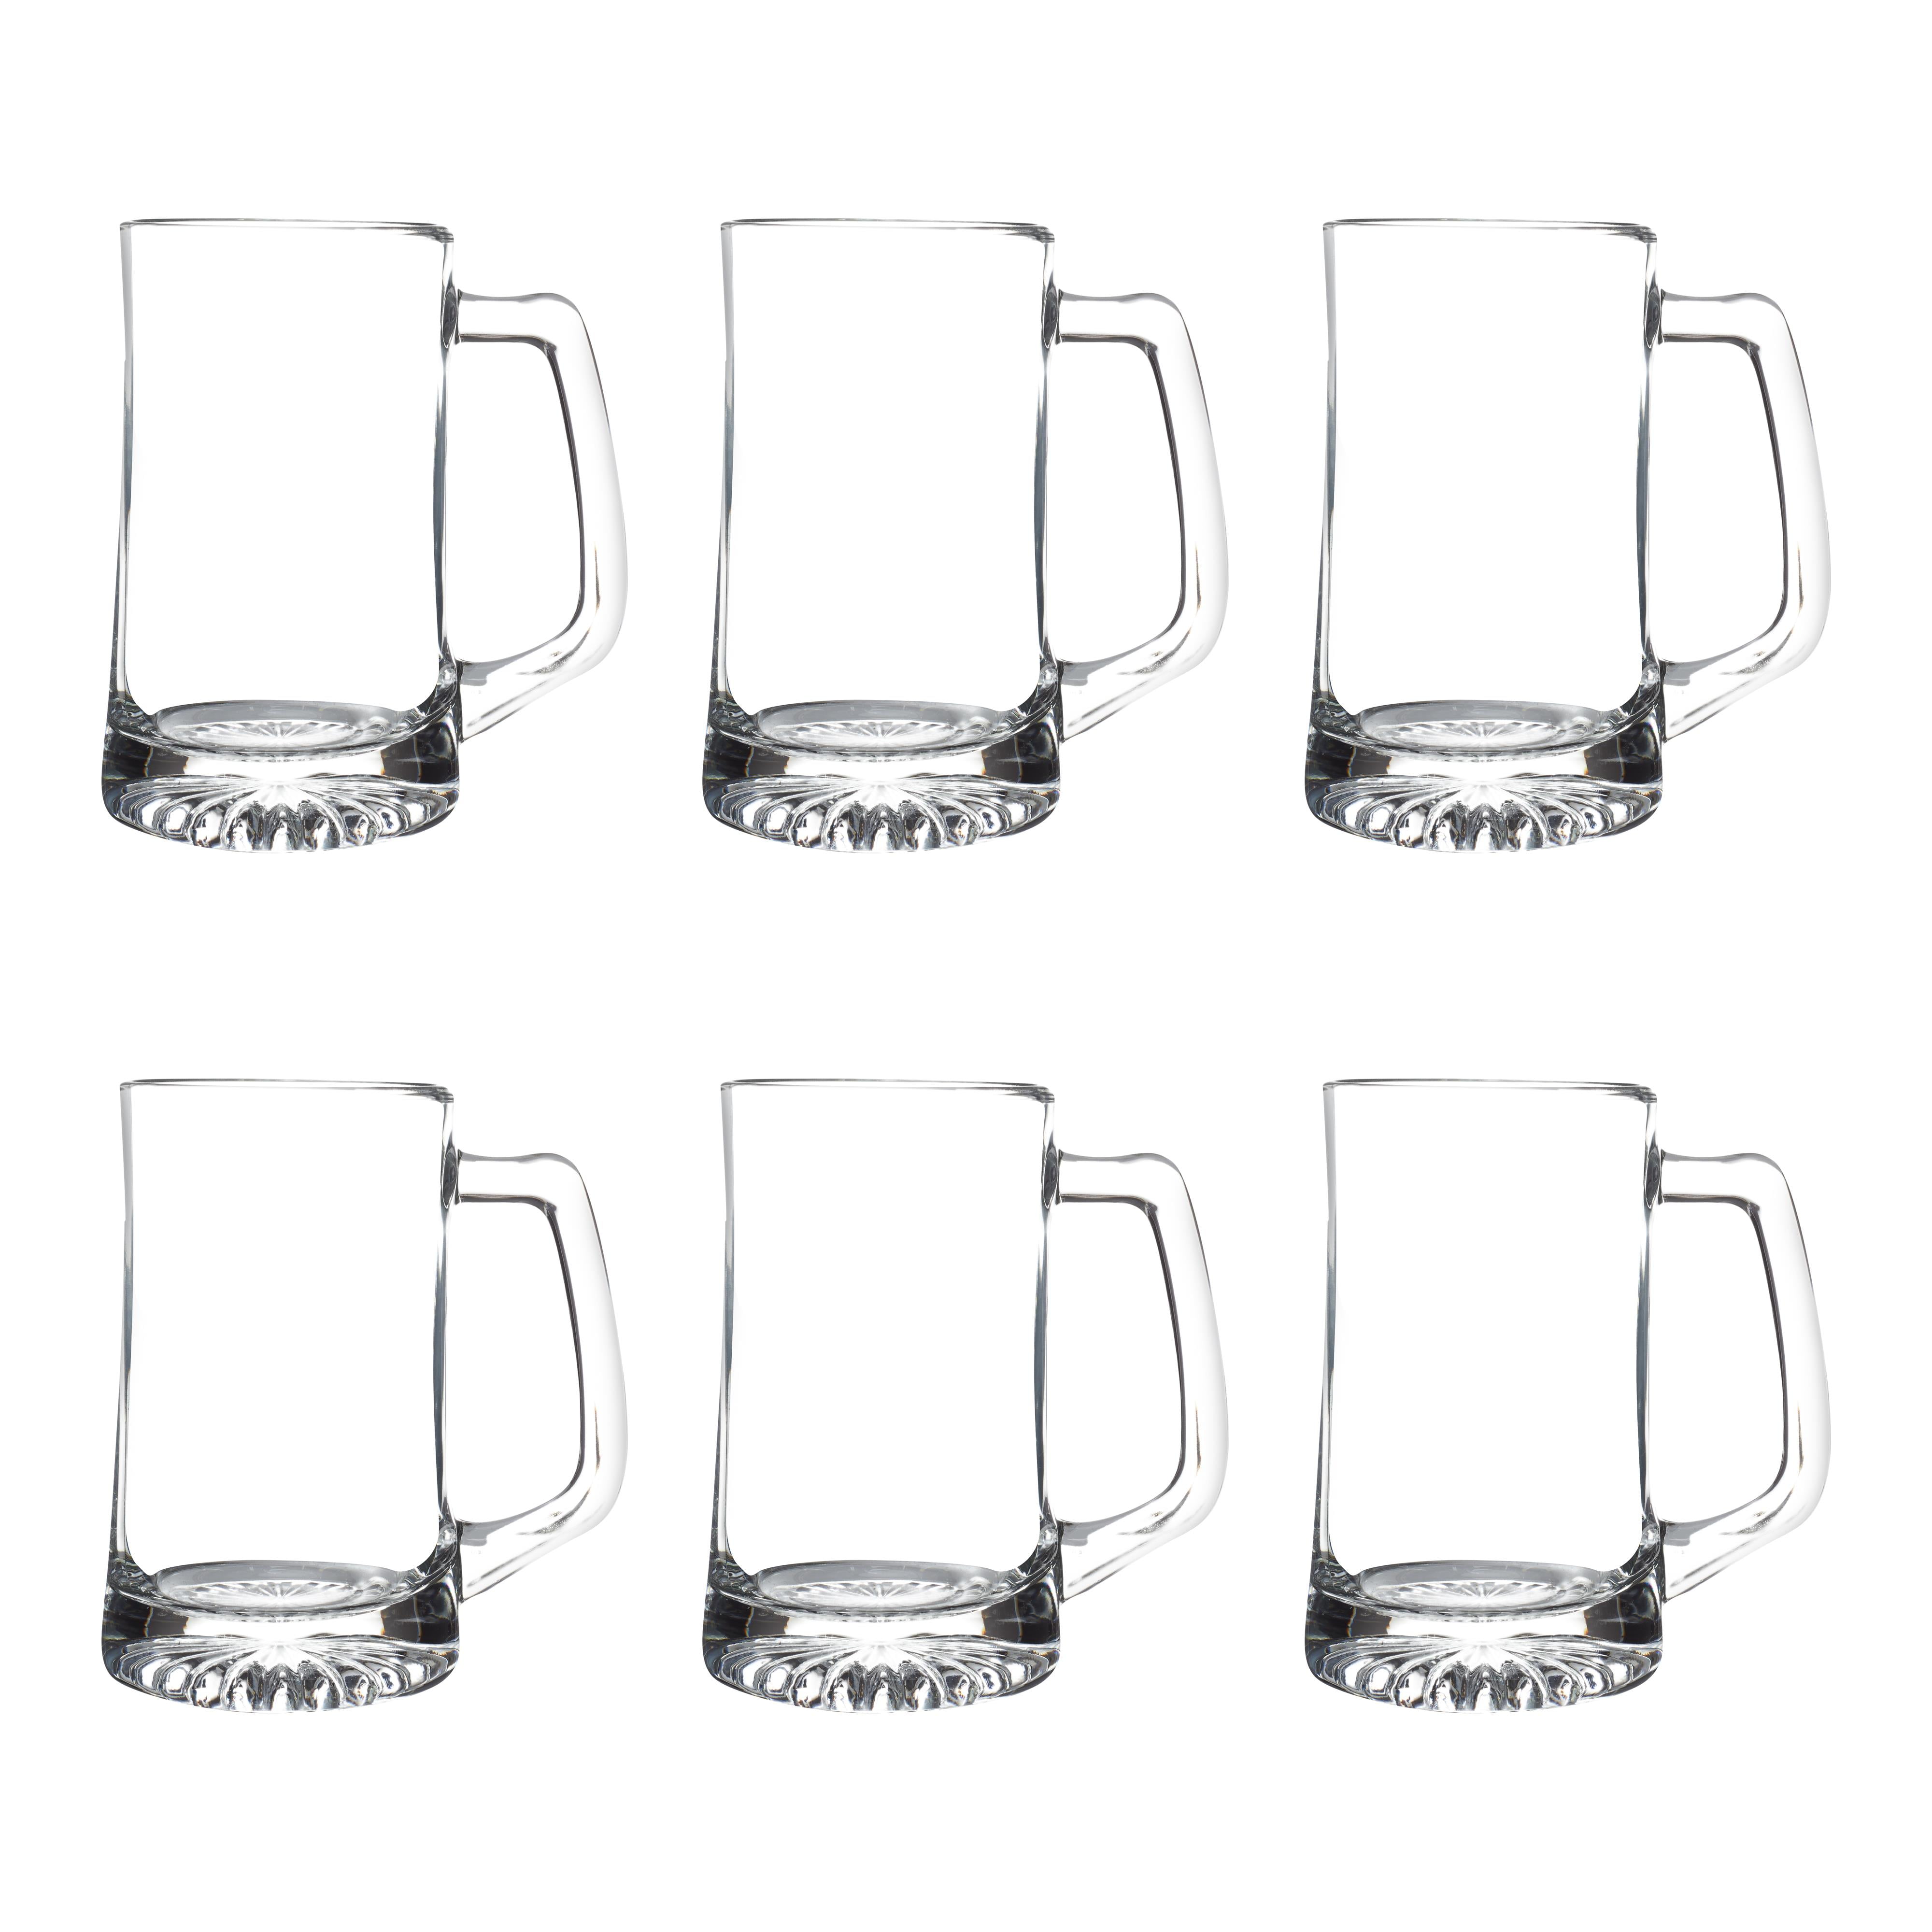 Granatan Beer Mugs with Gel Freezer 16 oz, Clear Double Walled Beer Mugs with Handles Set of 4